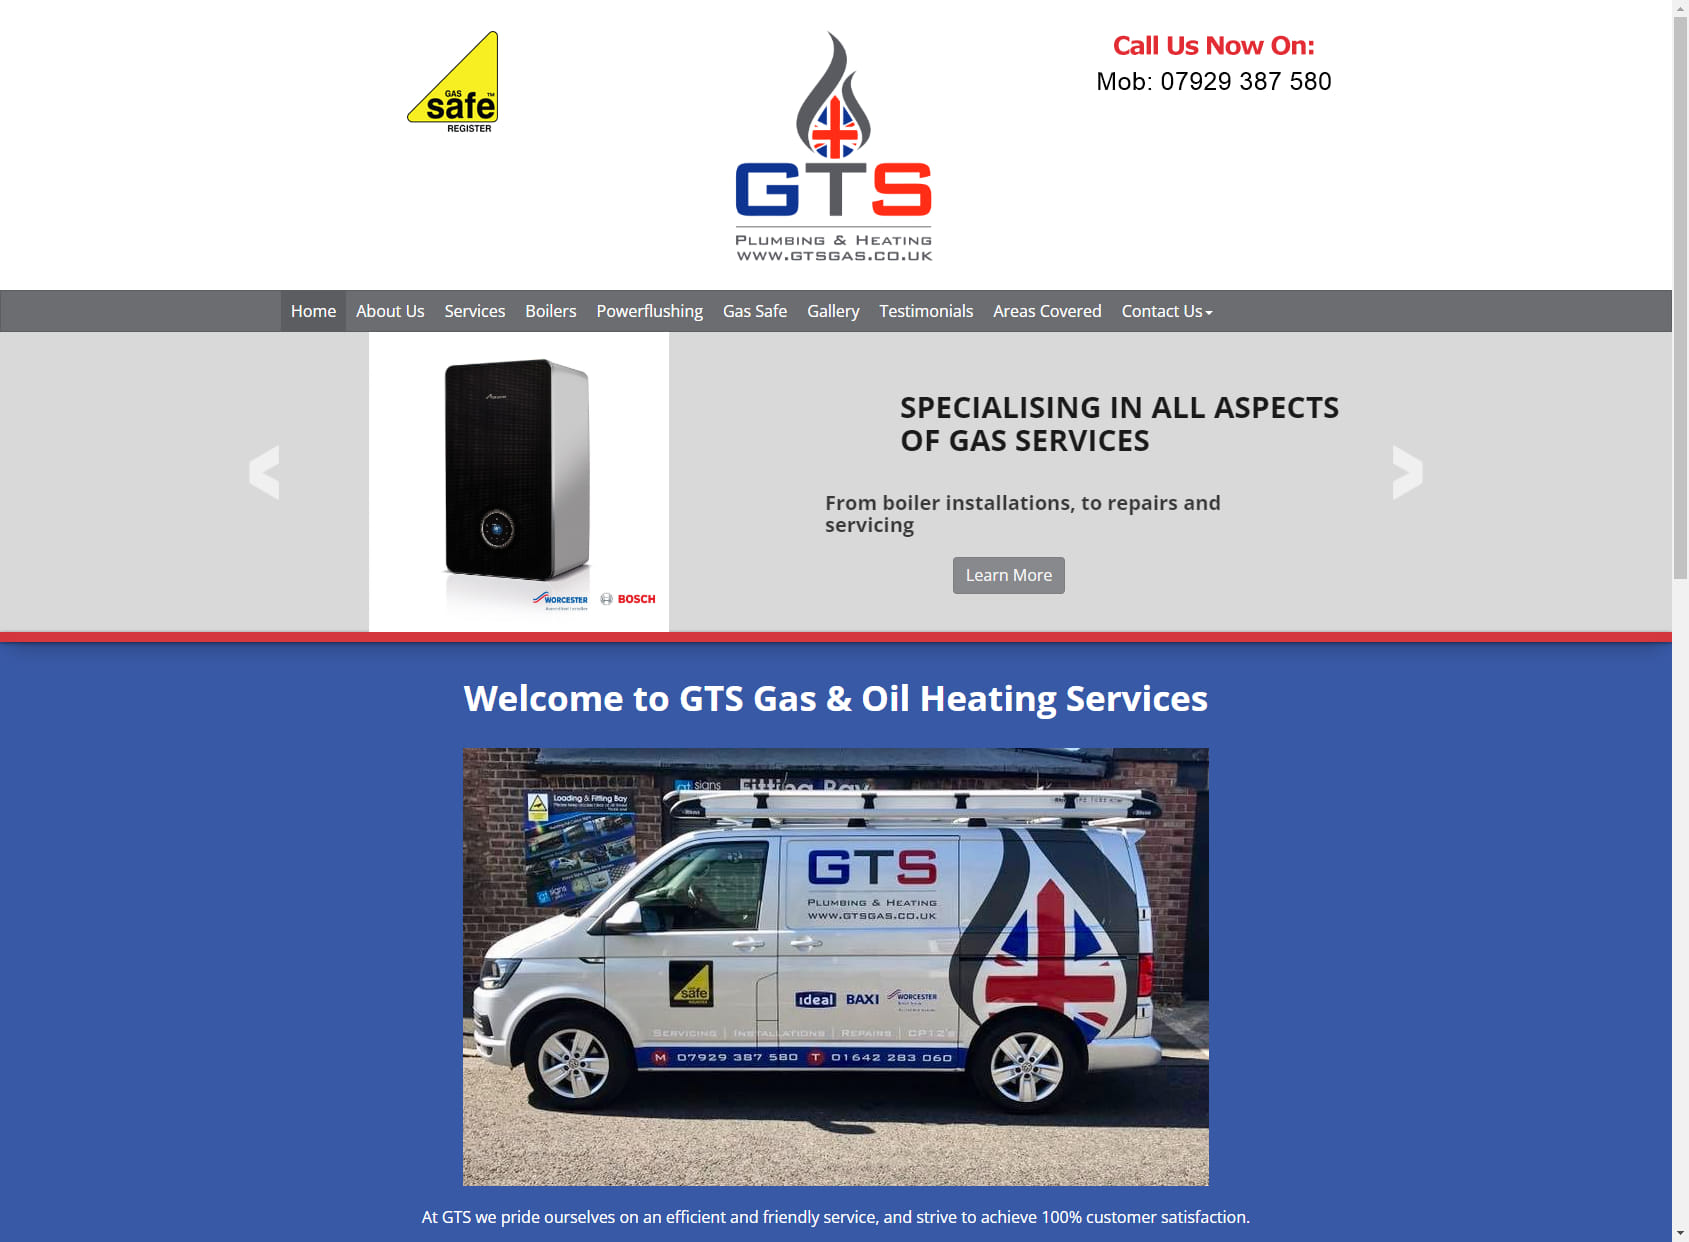 G T S Gas & Heating